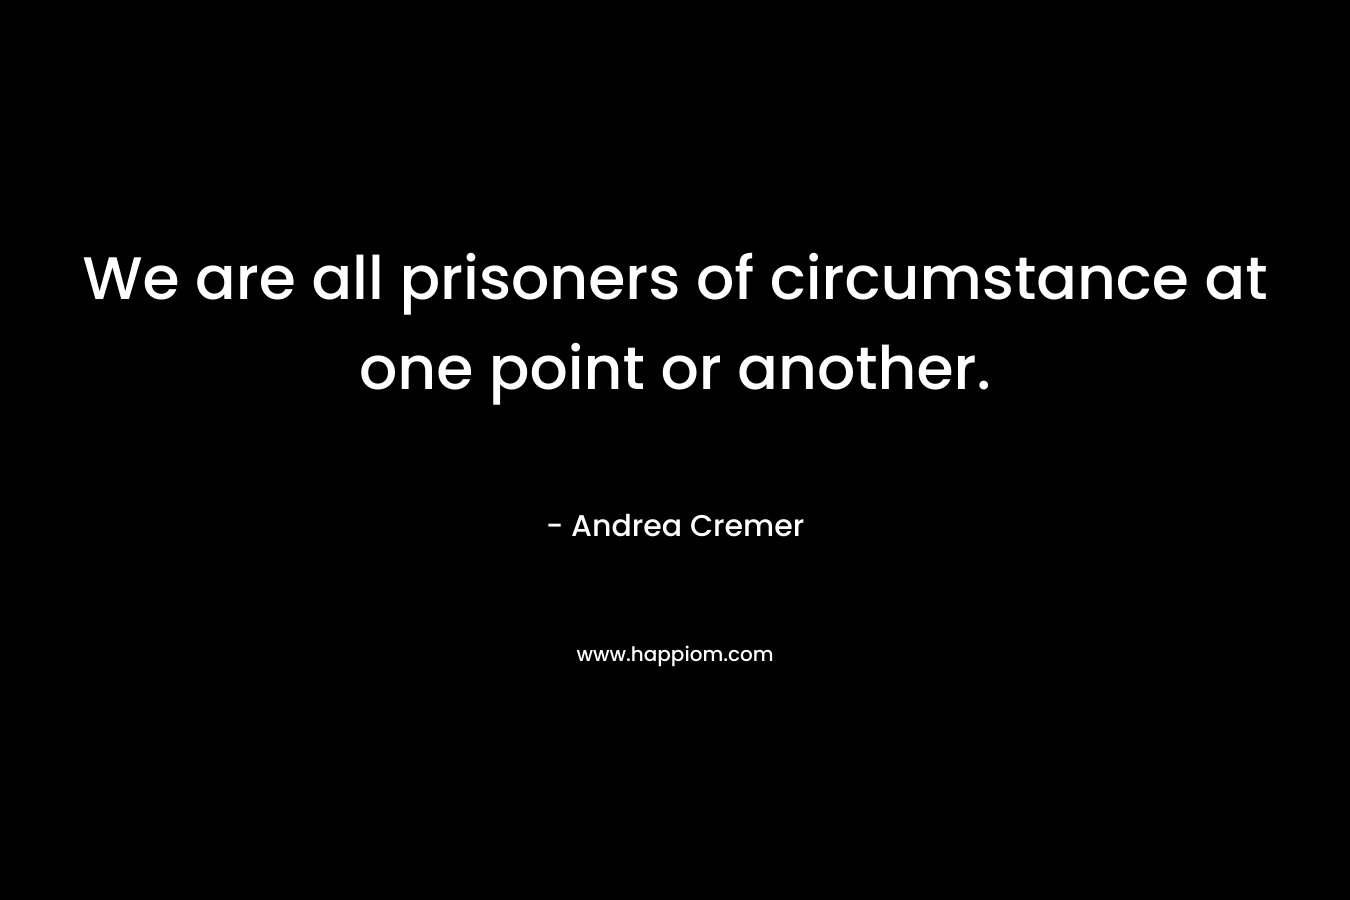 We are all prisoners of circumstance at one point or another. – Andrea Cremer